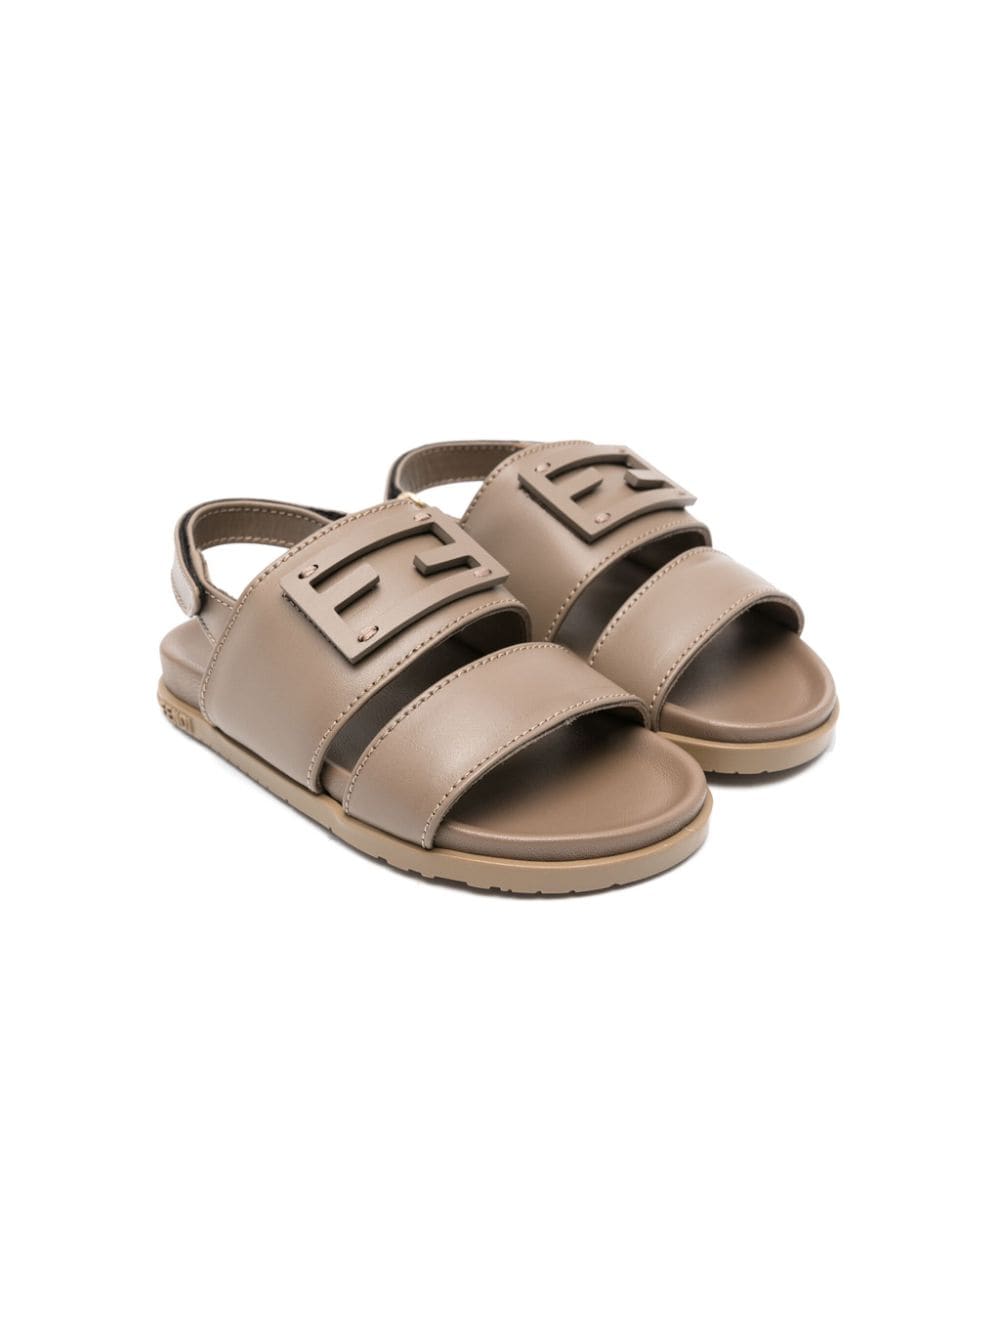 Fendi Brown Sandals For Kids With Ff Logo